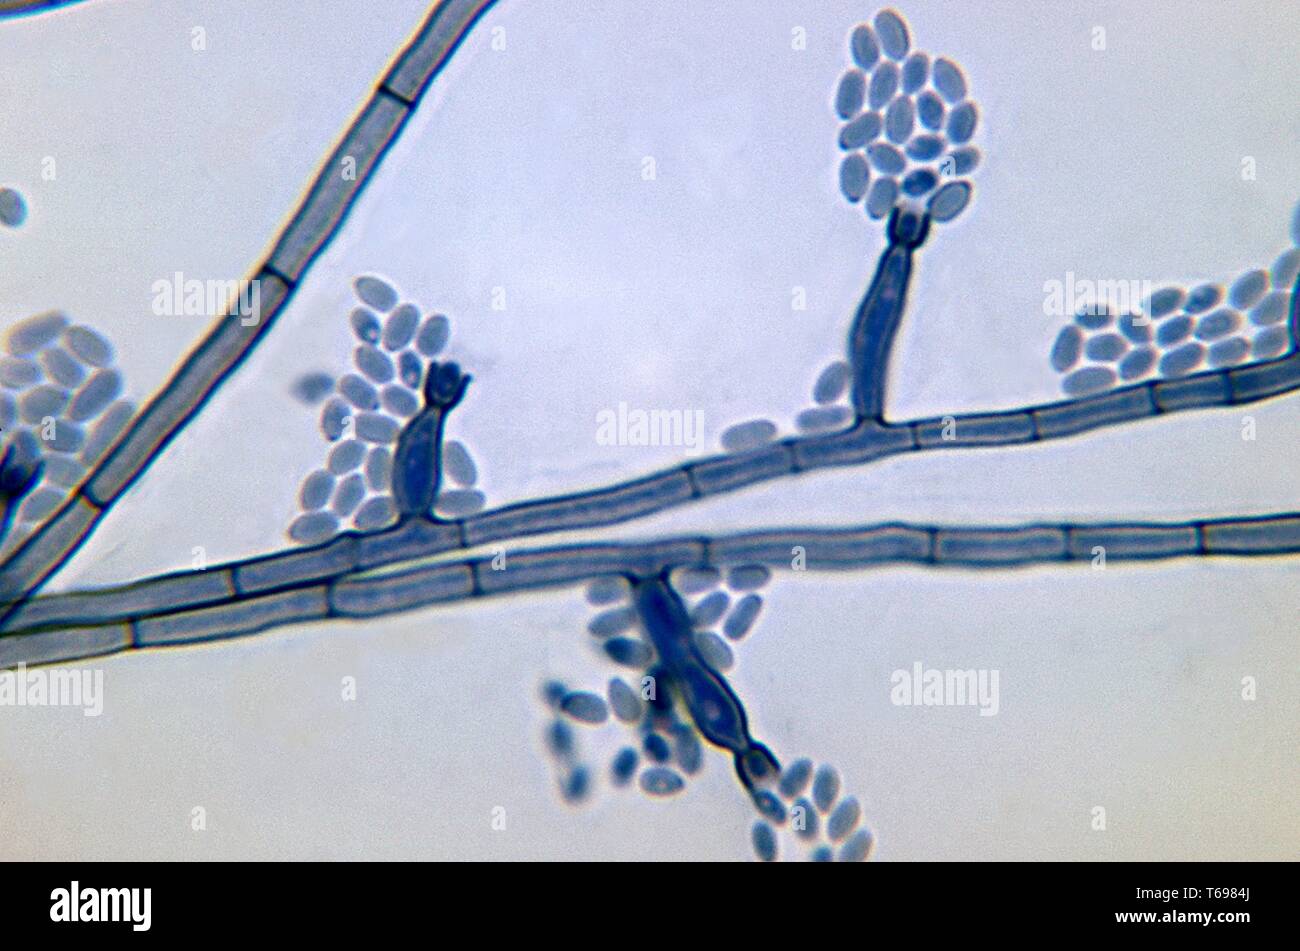 Photomicrograph of the conidia-laden conidiophores of the Phialophora verrucosa dematiaceous fungus from a slide culture, 1972. Image courtesy Centers for Disease Control and Prevention (CDC) / Dr. Libero Ajello. () Stock Photo